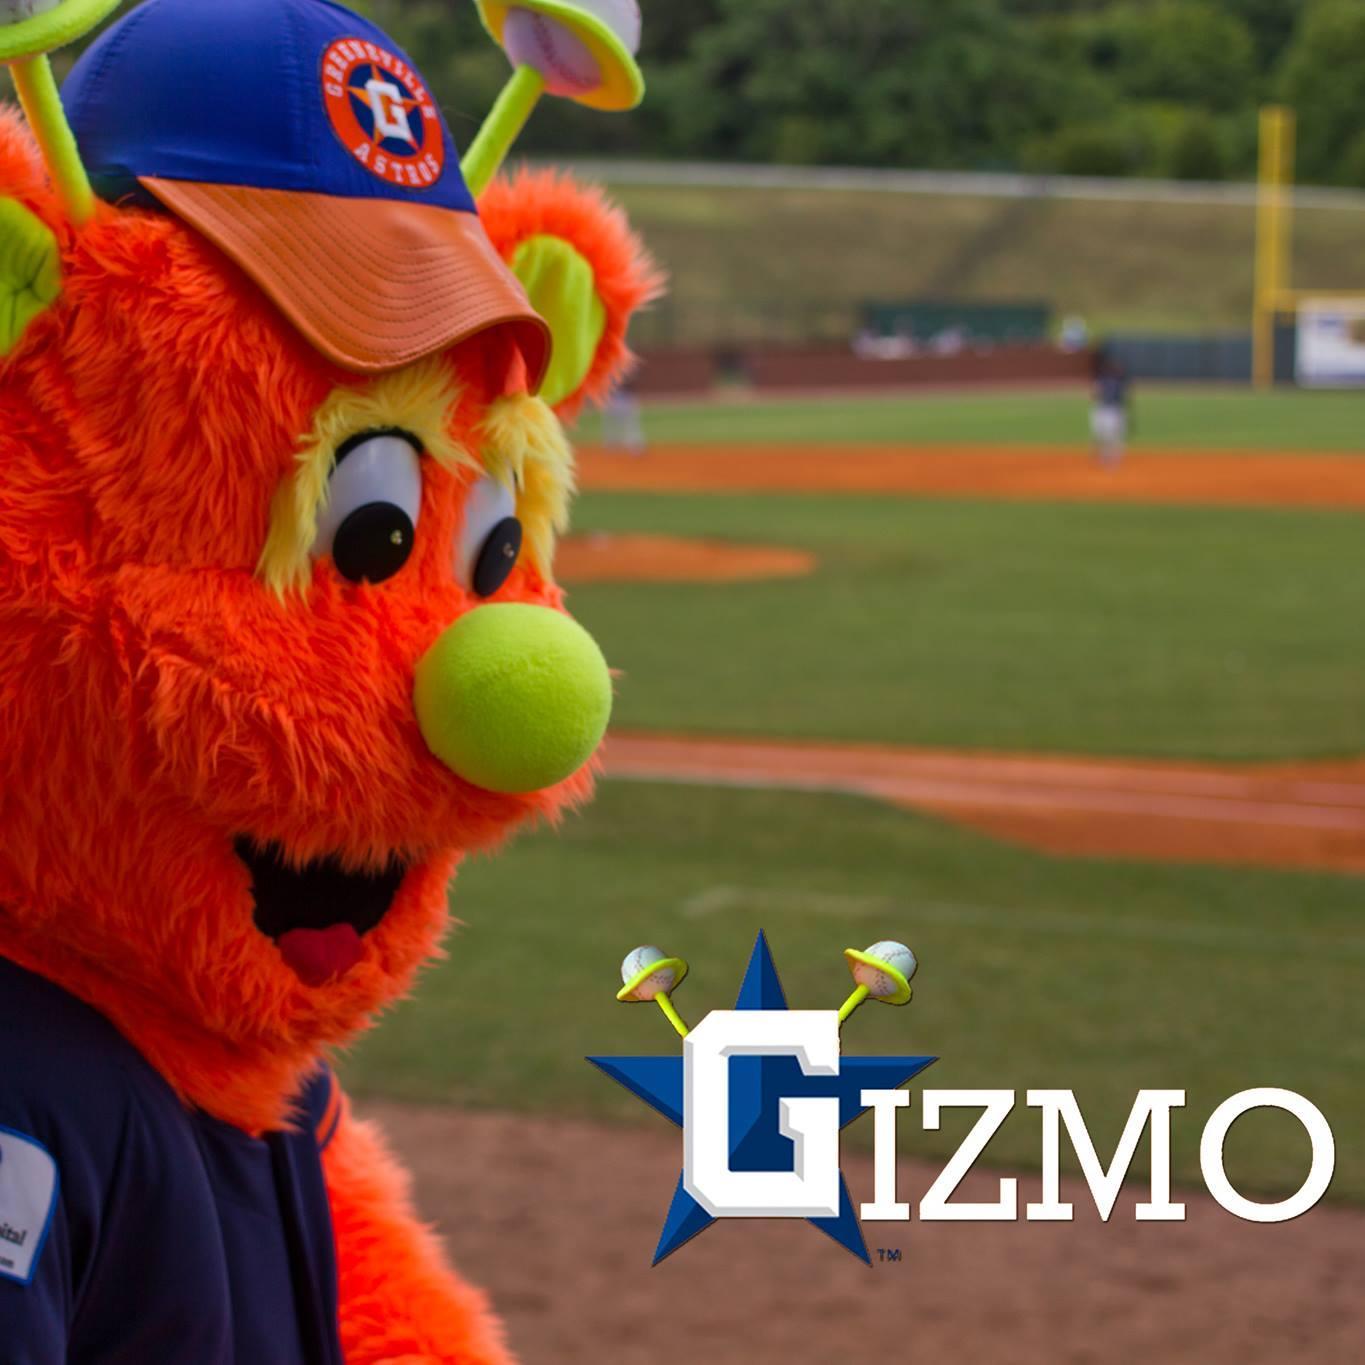 The official Twitter page for the @gvilleastros mascot, Gizmo!
You can also find me on Facebook or Instagram @GizmoAstros!